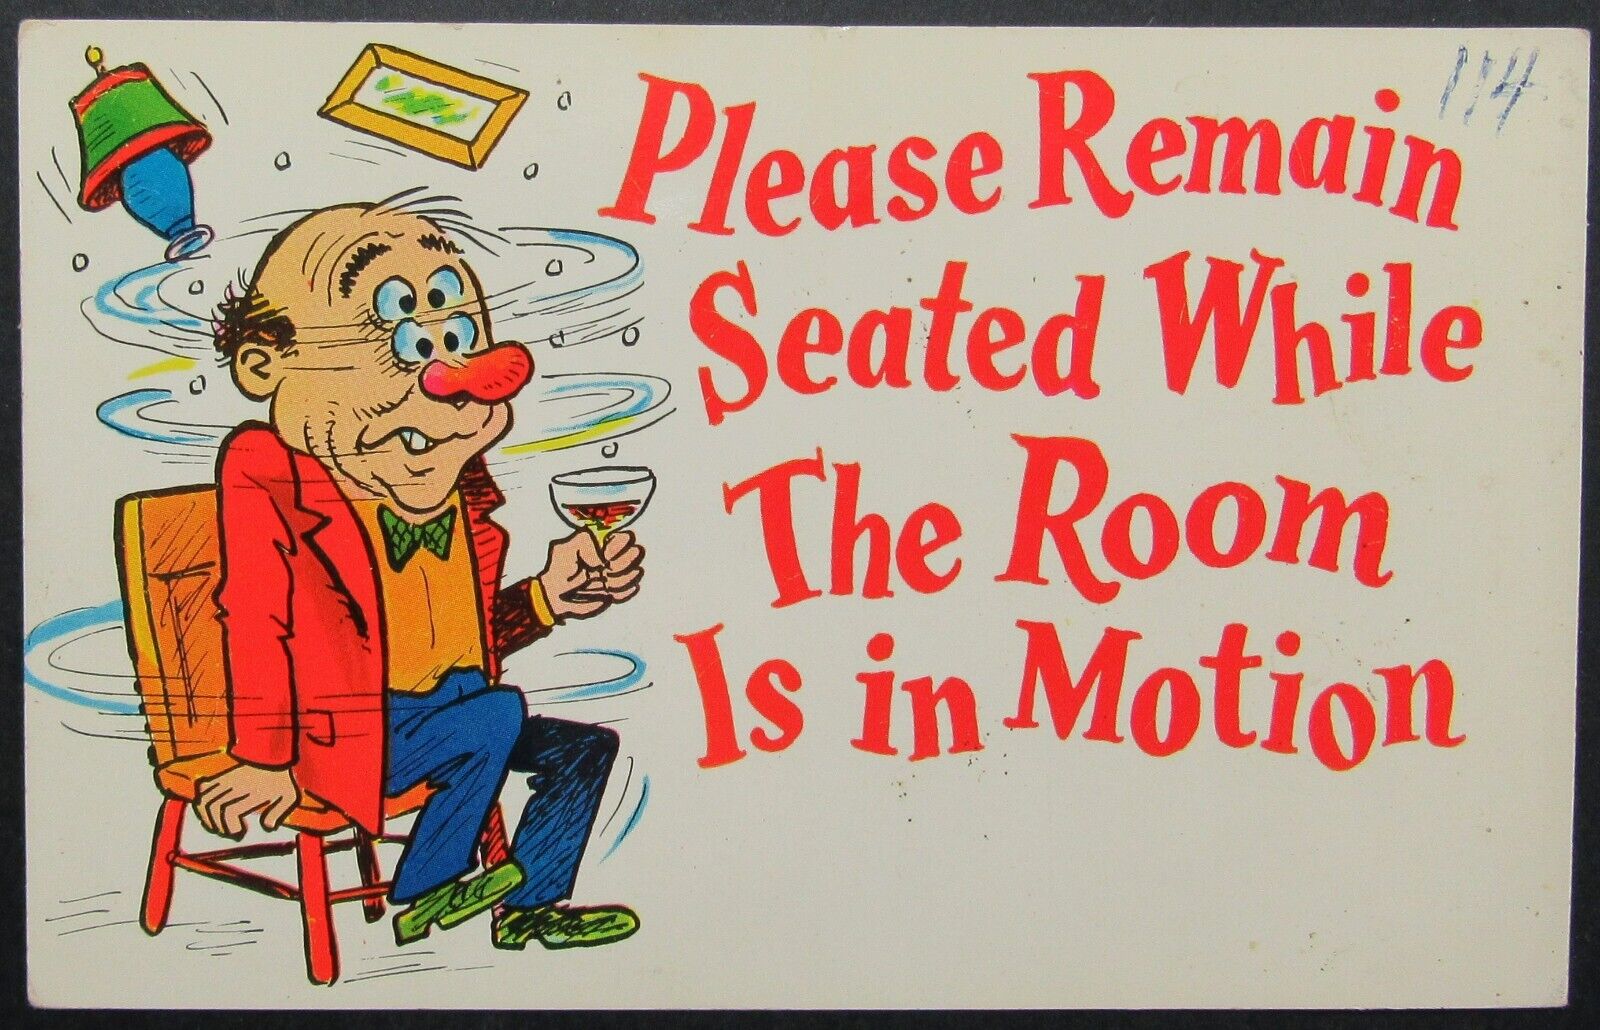 Drunk Man Spins Please Remain Seated While Room in Motion Comic Postcard 